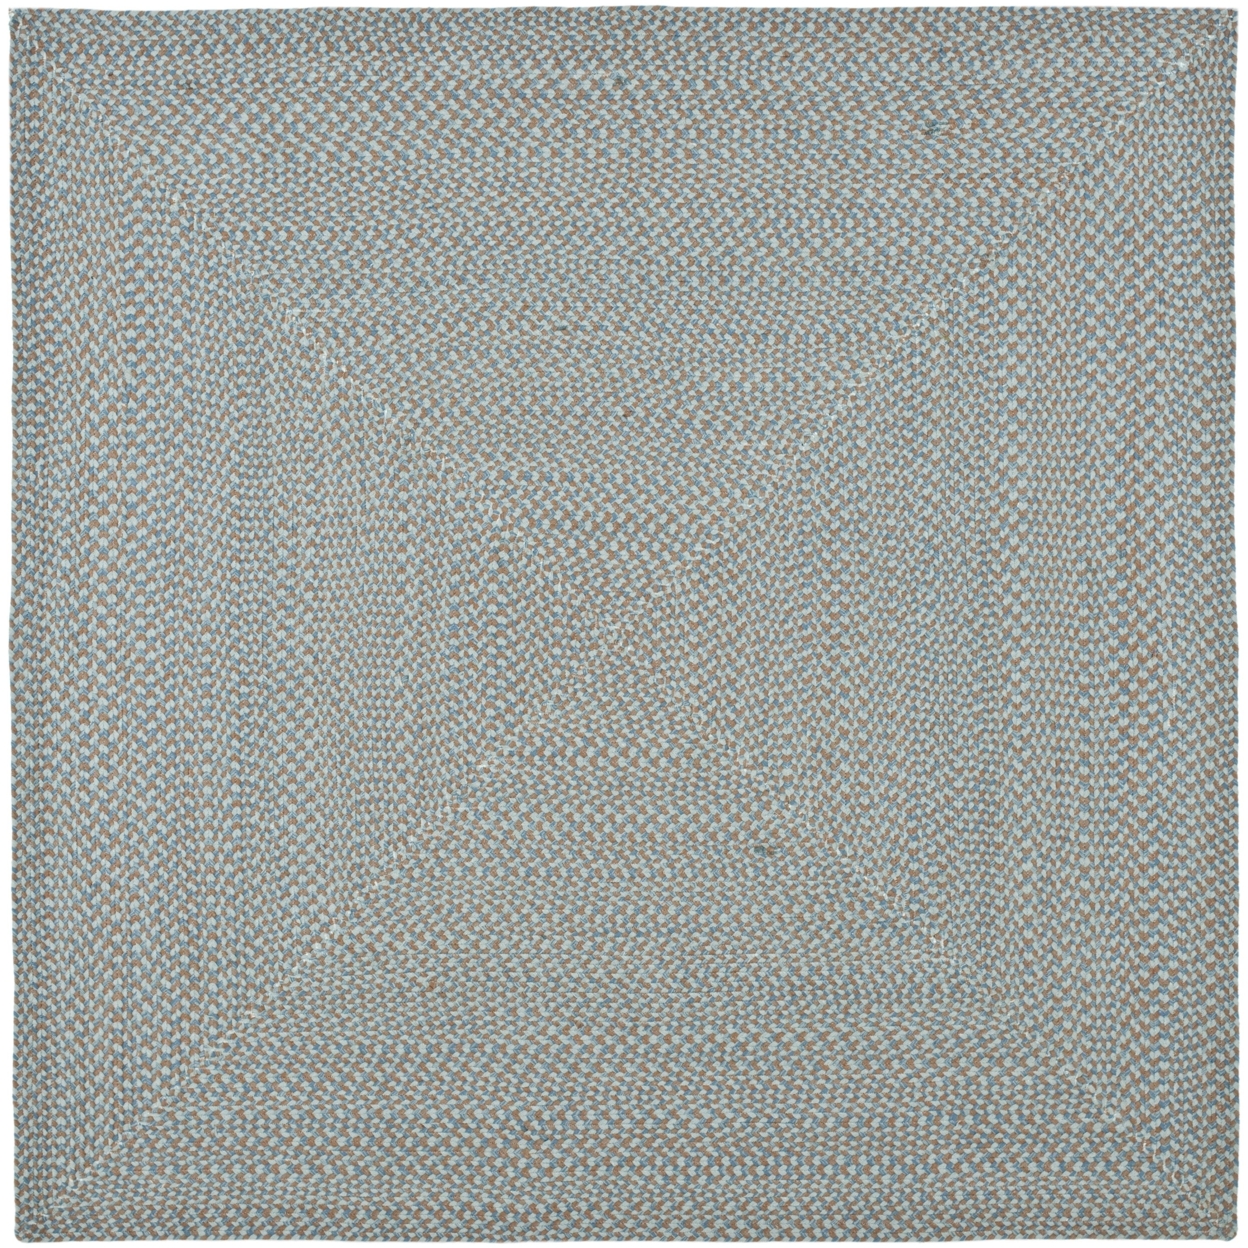 SAFAVIEH Braided Collection BRD170A Handwoven Multi Rug - 6' Square